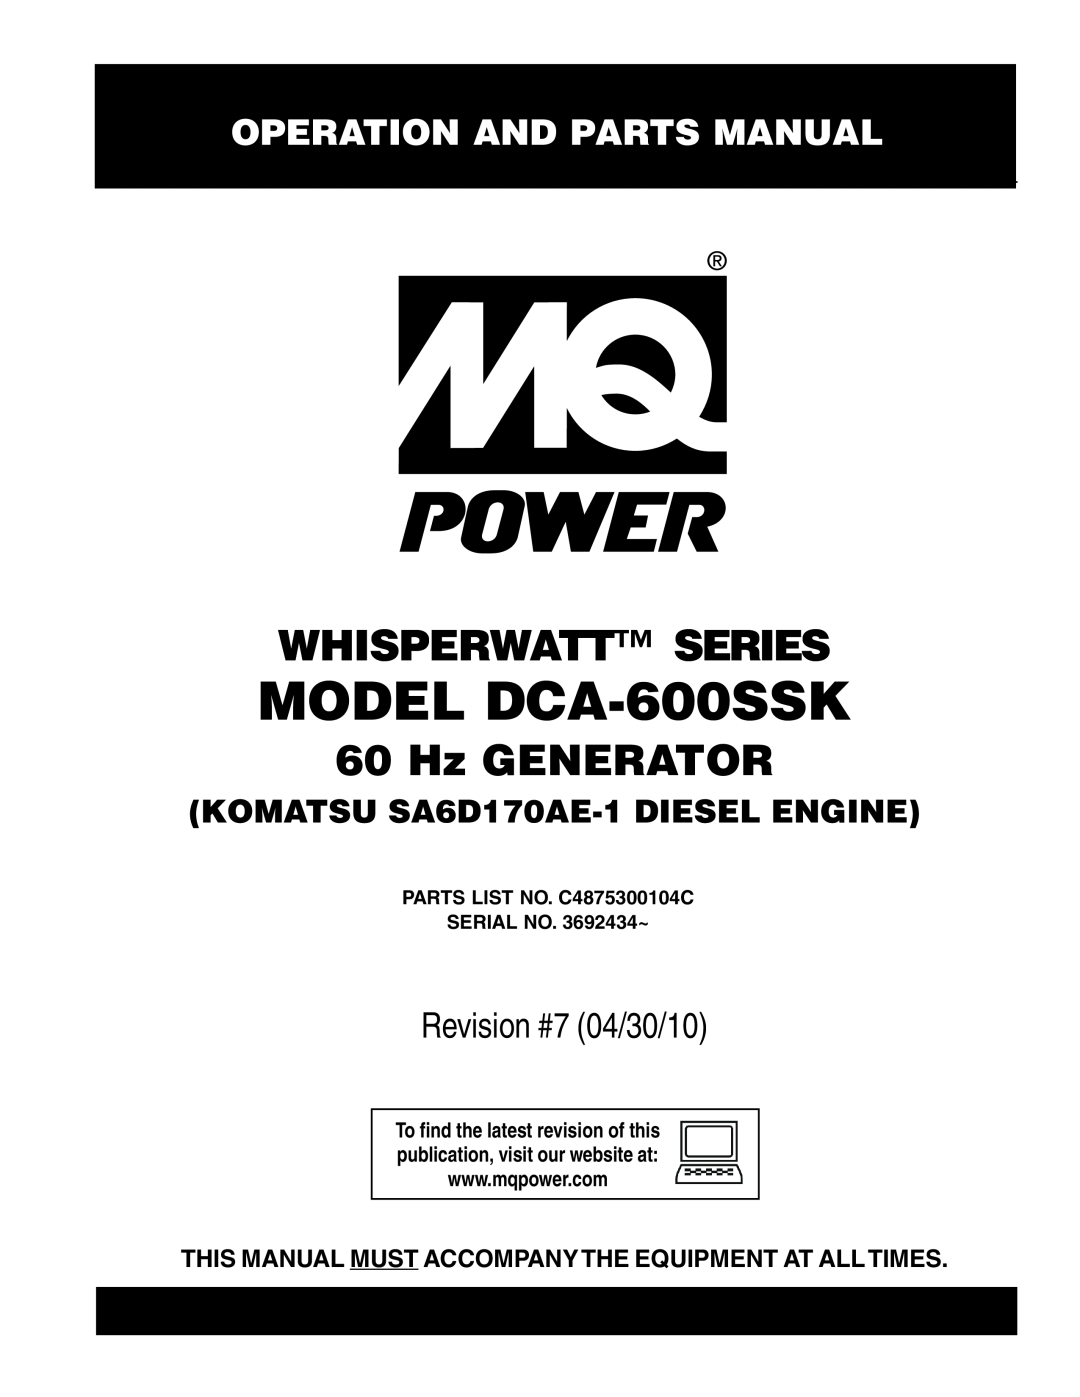 Multiquip operation manual Operation And Parts Manual, KOMATSU SA6D170AE-1 DIESEL ENGINE, MODEL DCA-600SSK 